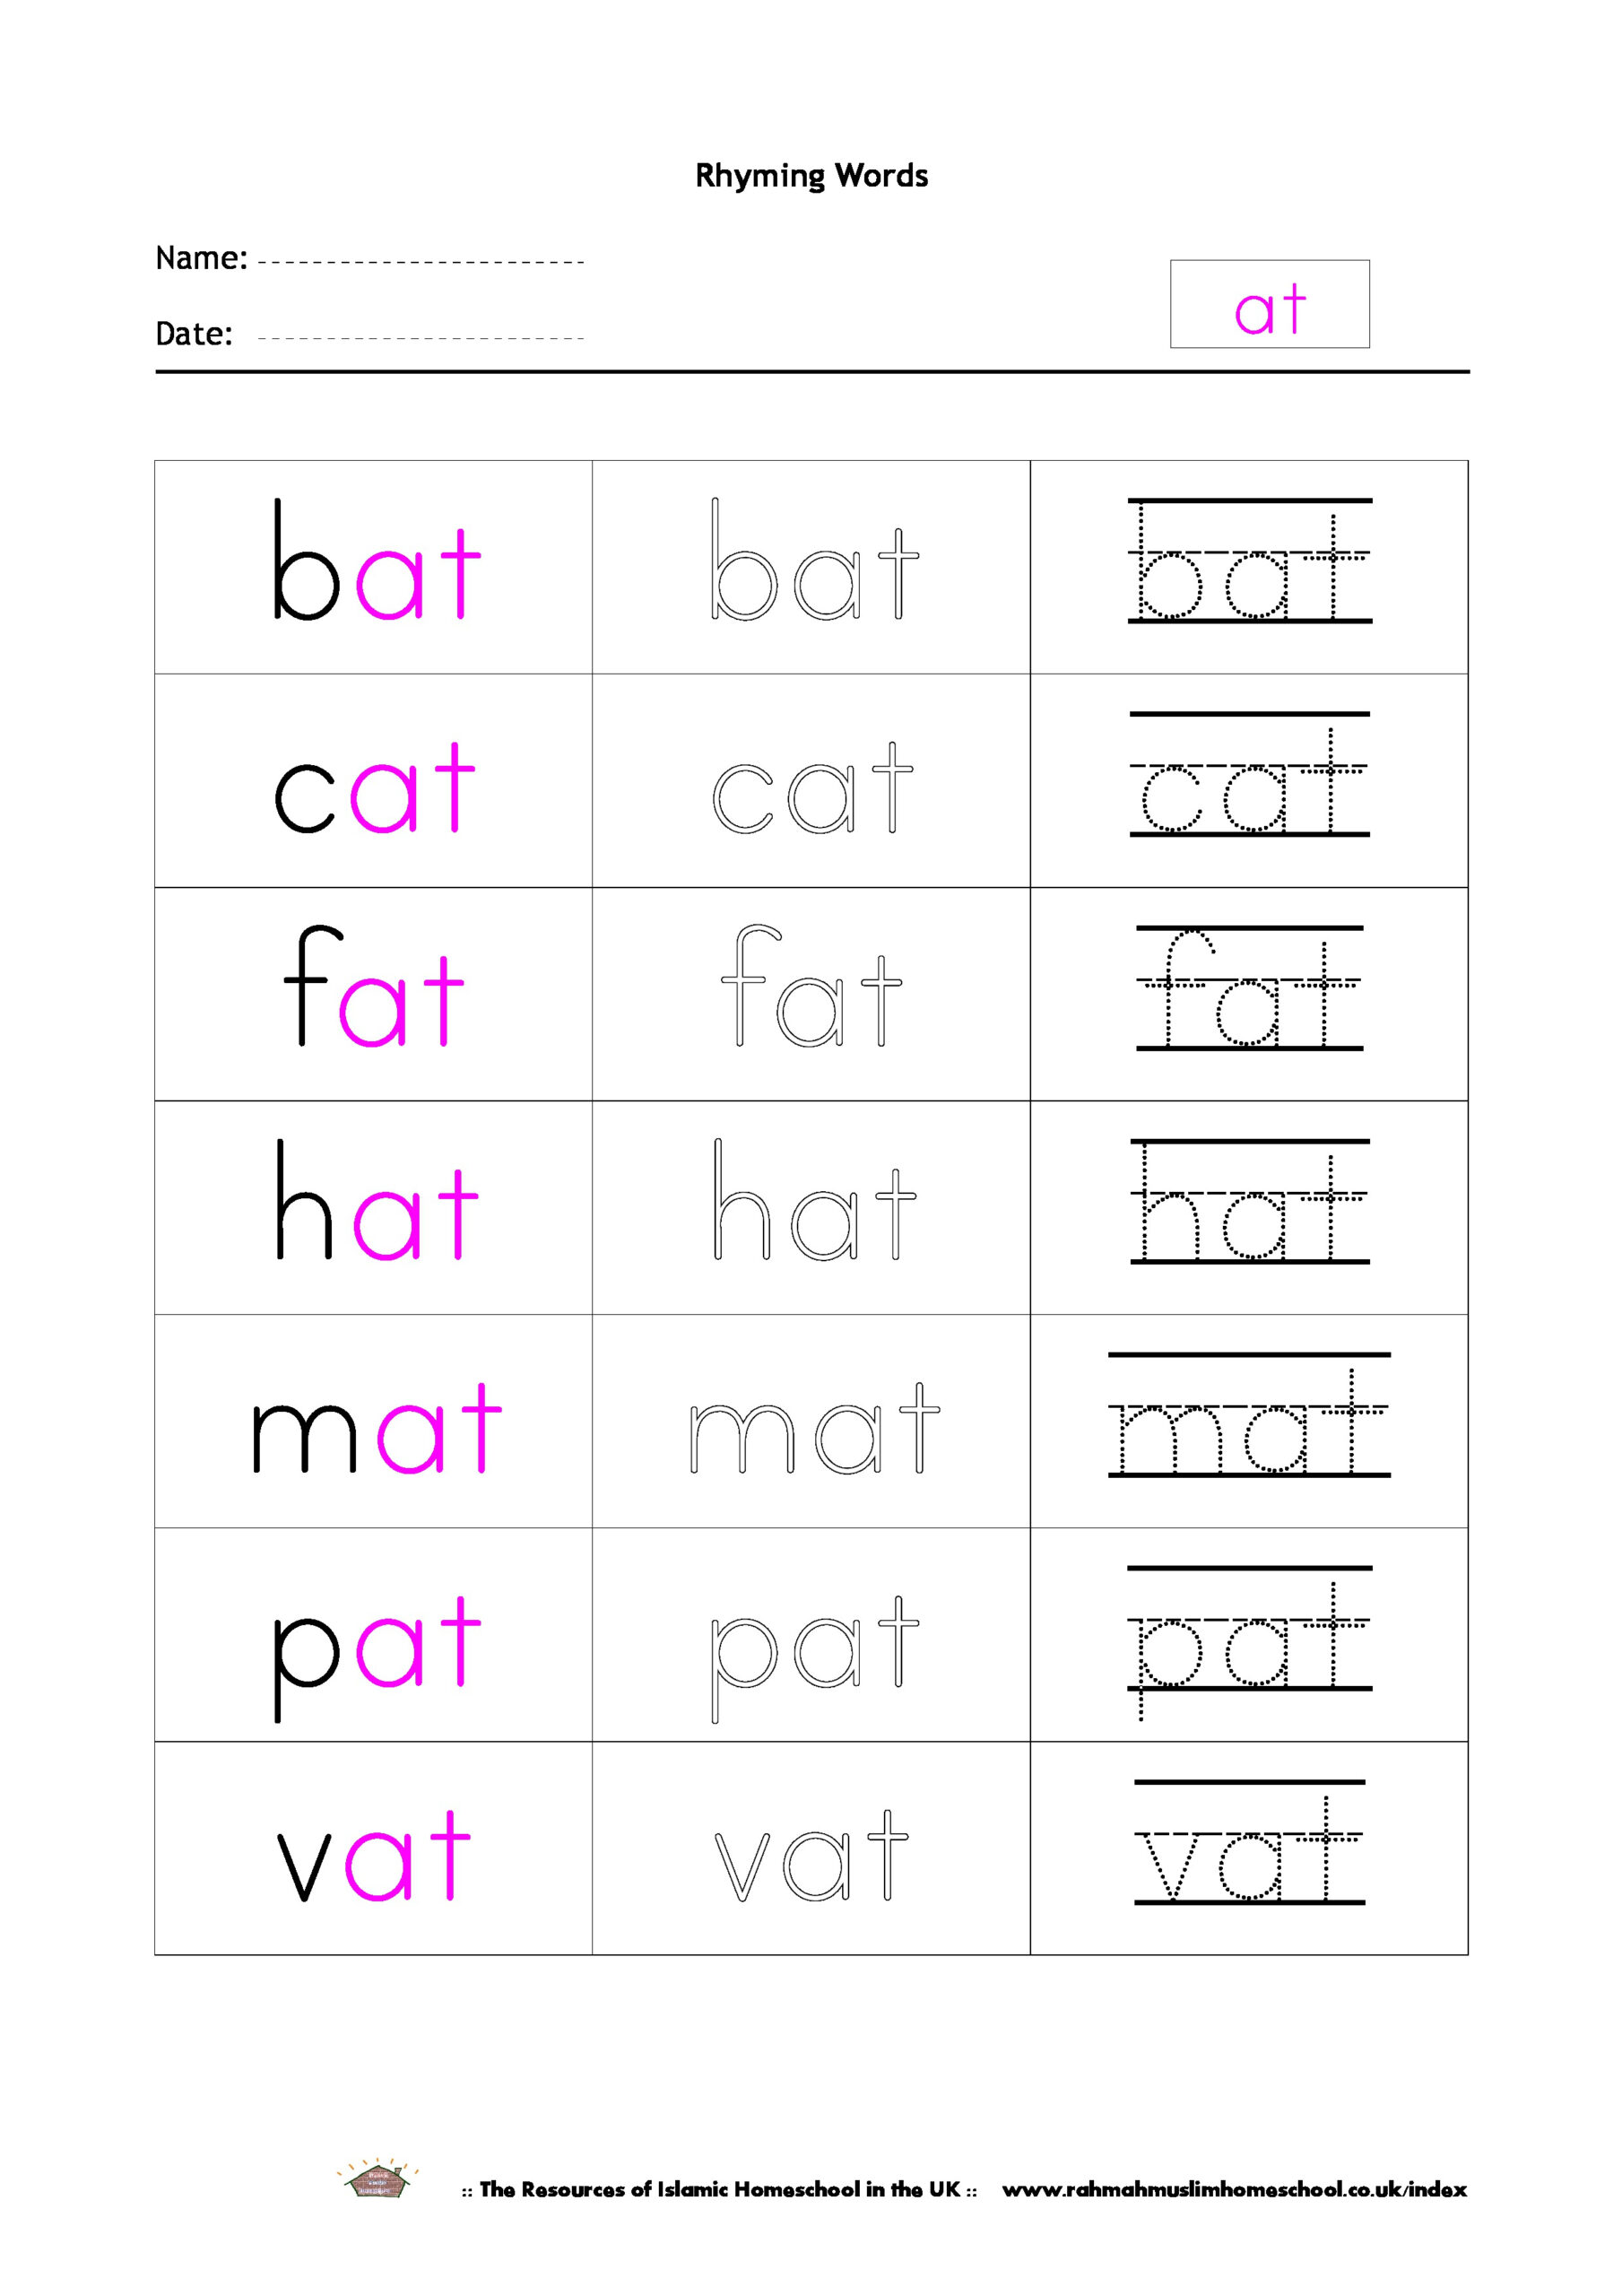 Free Rhyming Words Worksheet at The Resources Of 